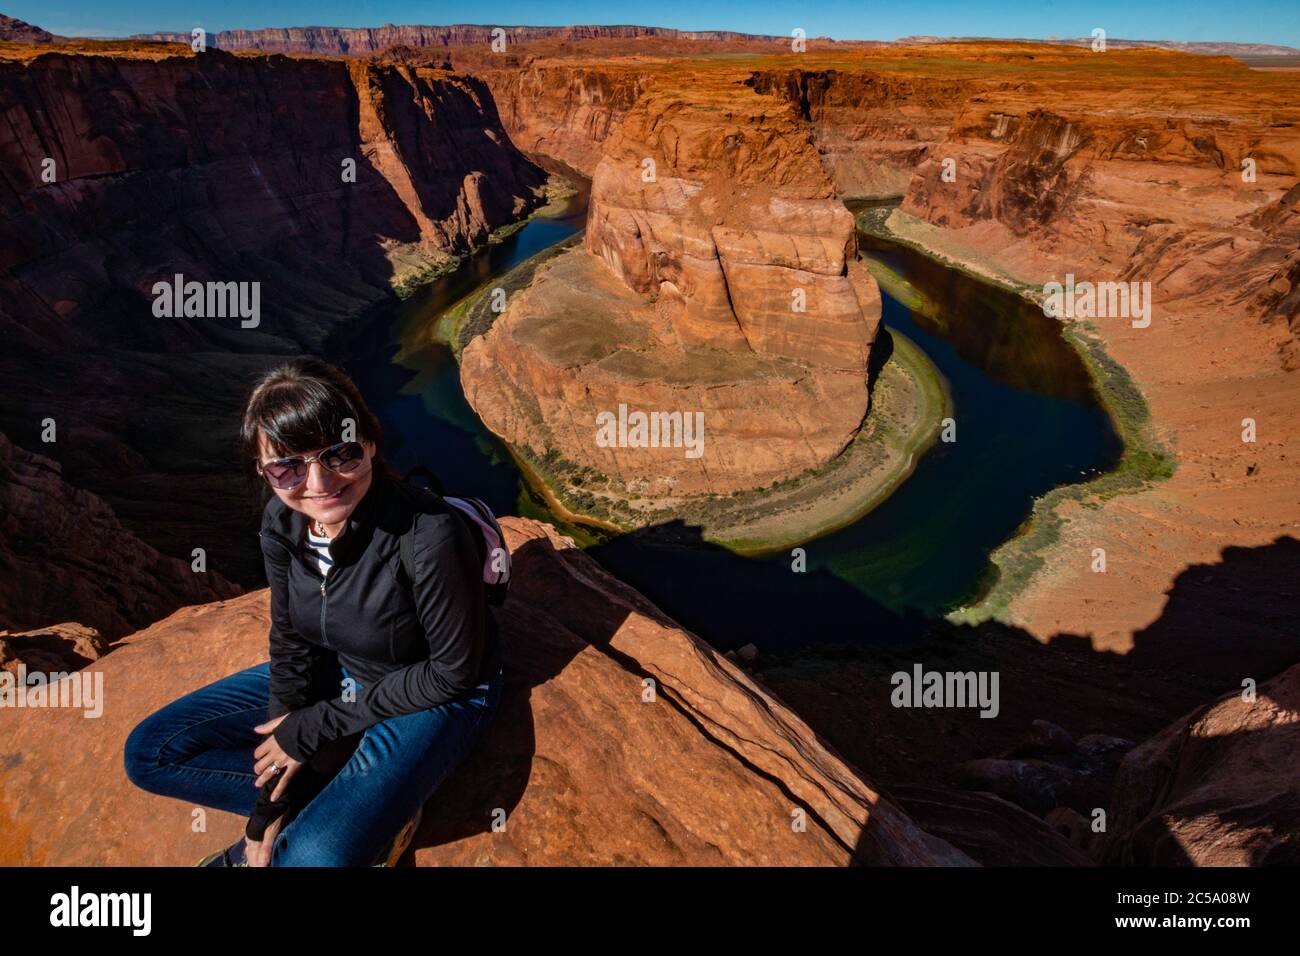 A tourist poses on the Horseshoe Bend overlook of the Colorado River outside of Page, Arizona. Stock Photo